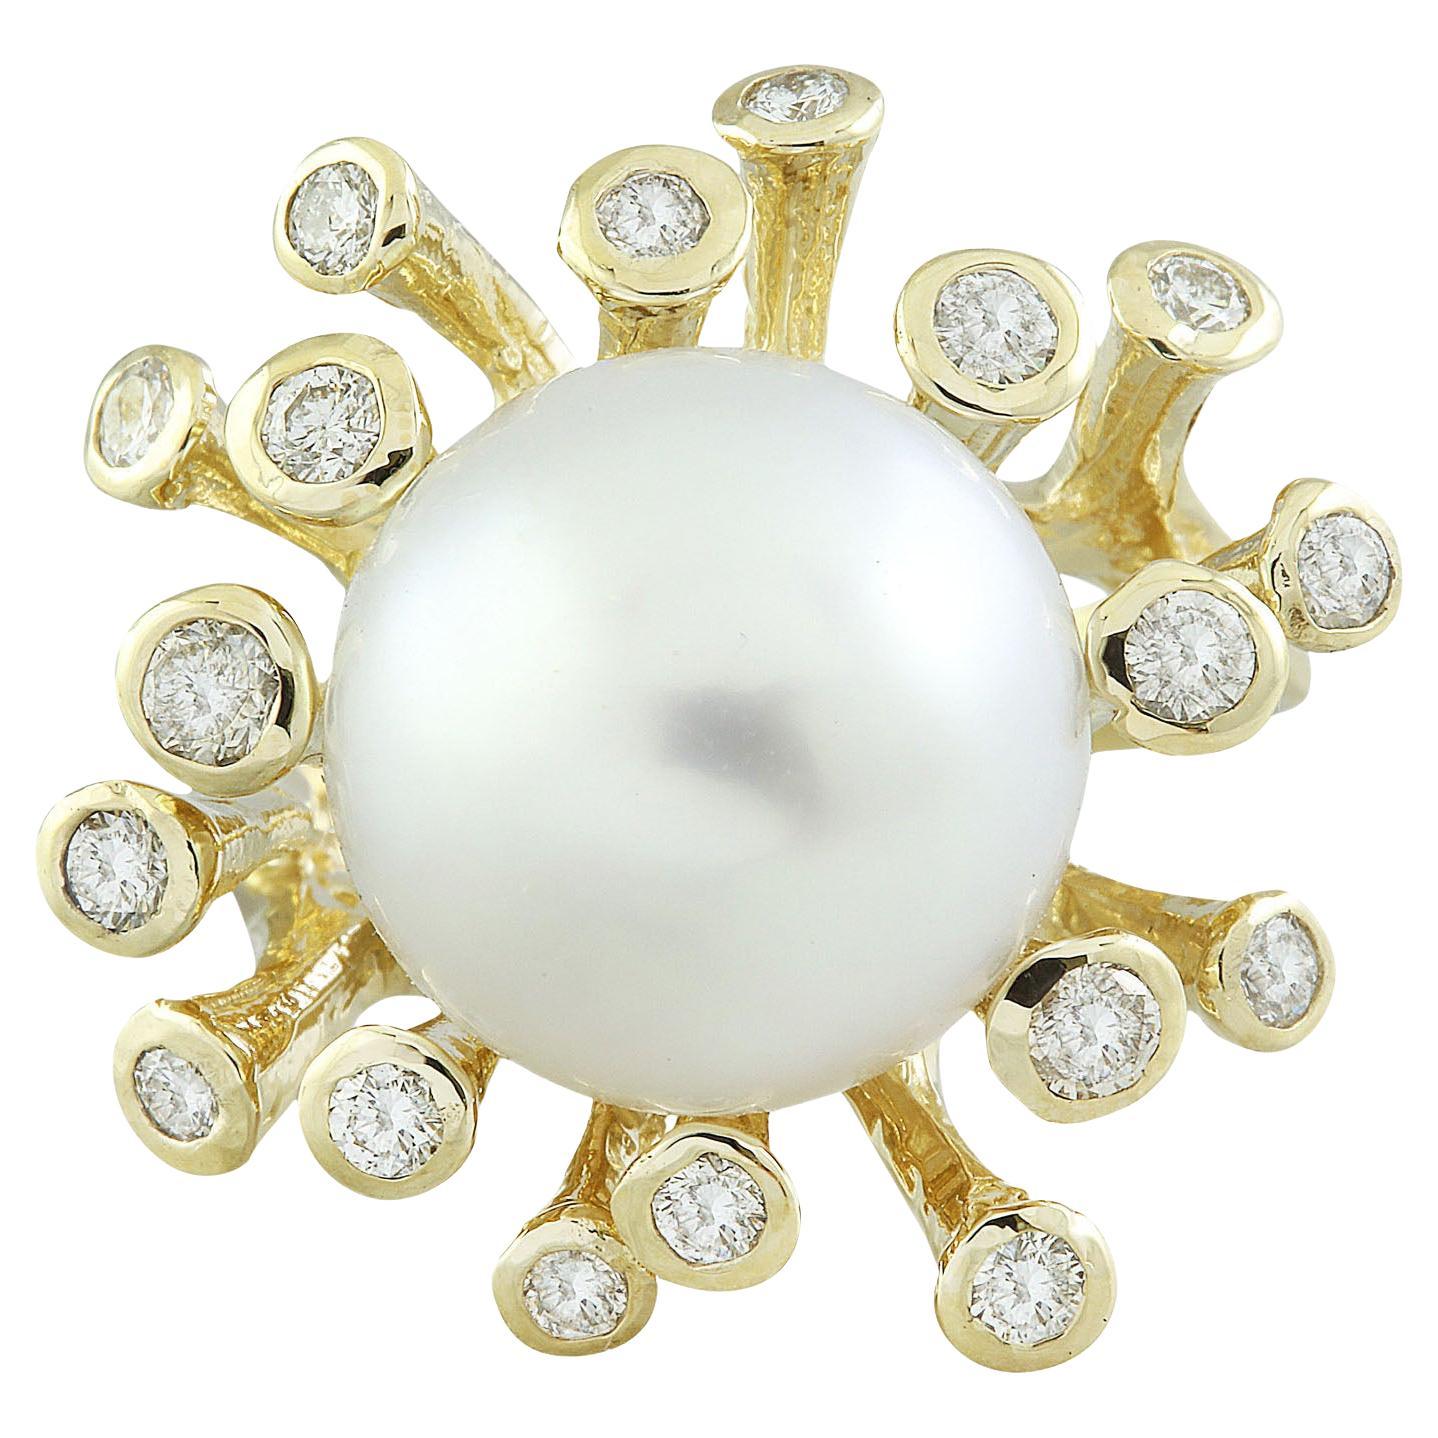 Natural South Sea Pearl Diamond Ring In 14 Karat Yellow Gold  For Sale